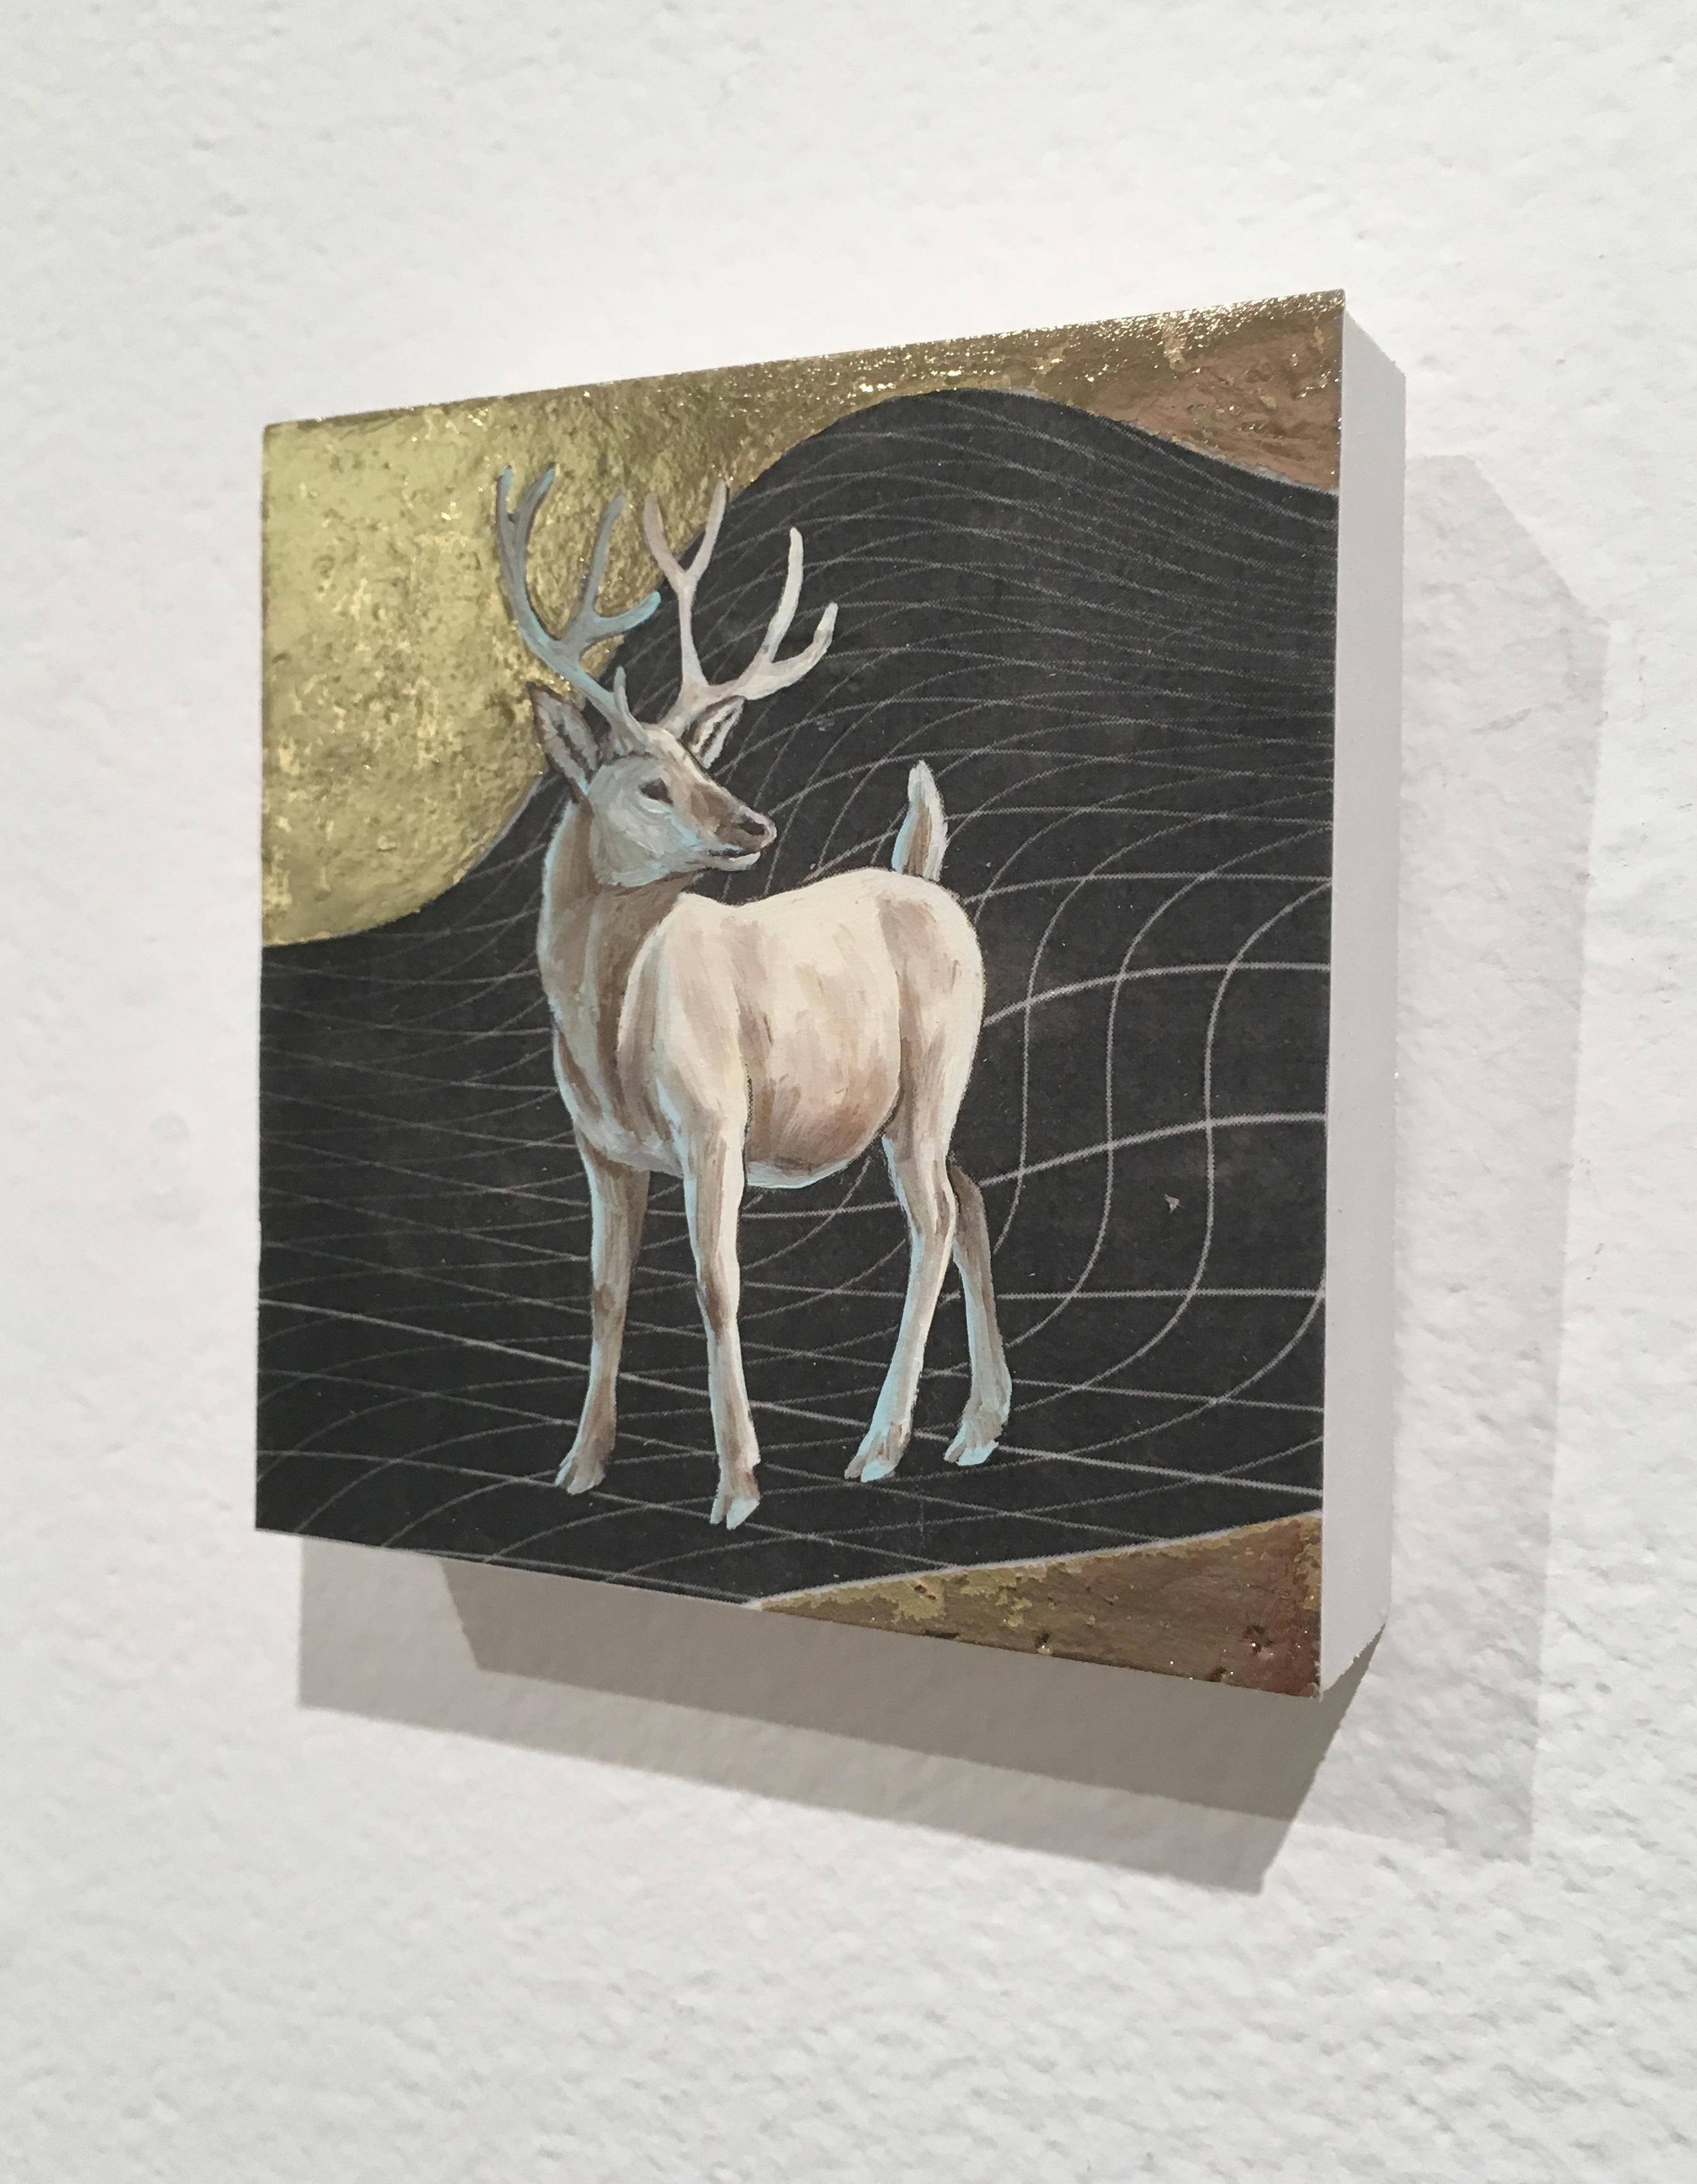 Winter Stag, oil, metal foil, on wood, creature, figurative, animal, antlers - Brown Animal Painting by Alexis Kandra